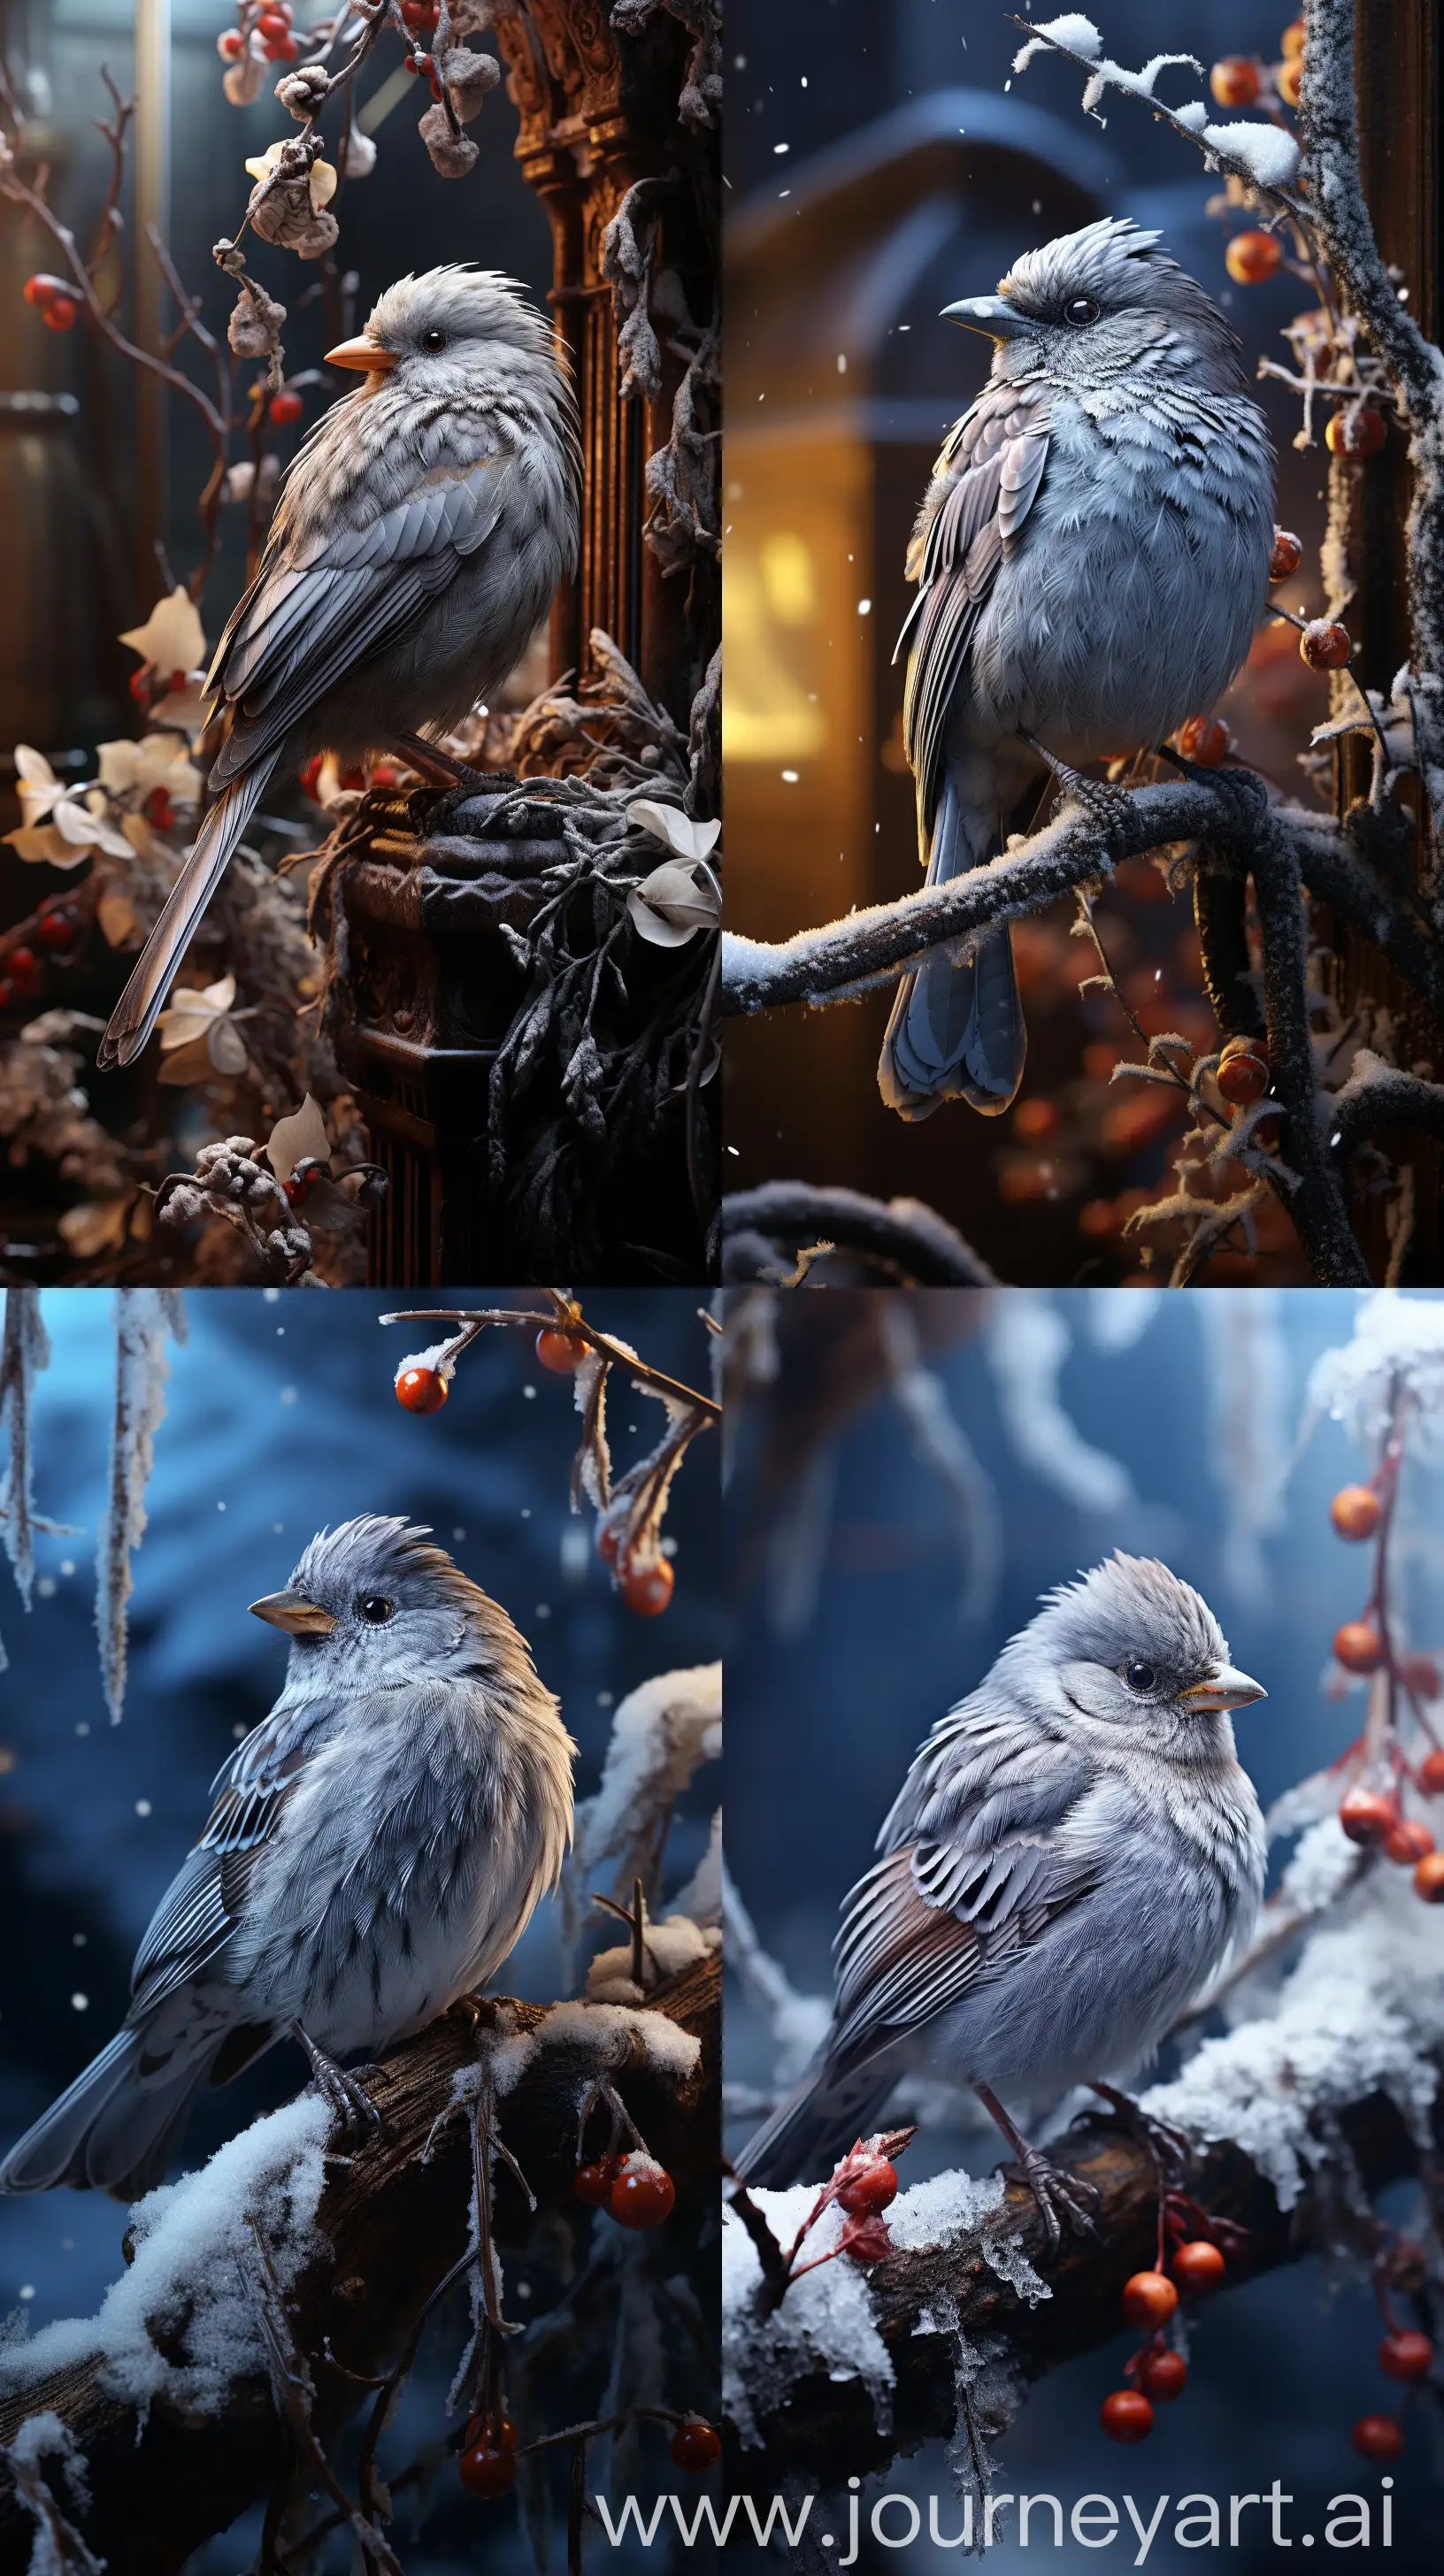 Snowy-Sparrow-Perched-Near-Entrance-Gate-Detailed-8K-Quality-Image